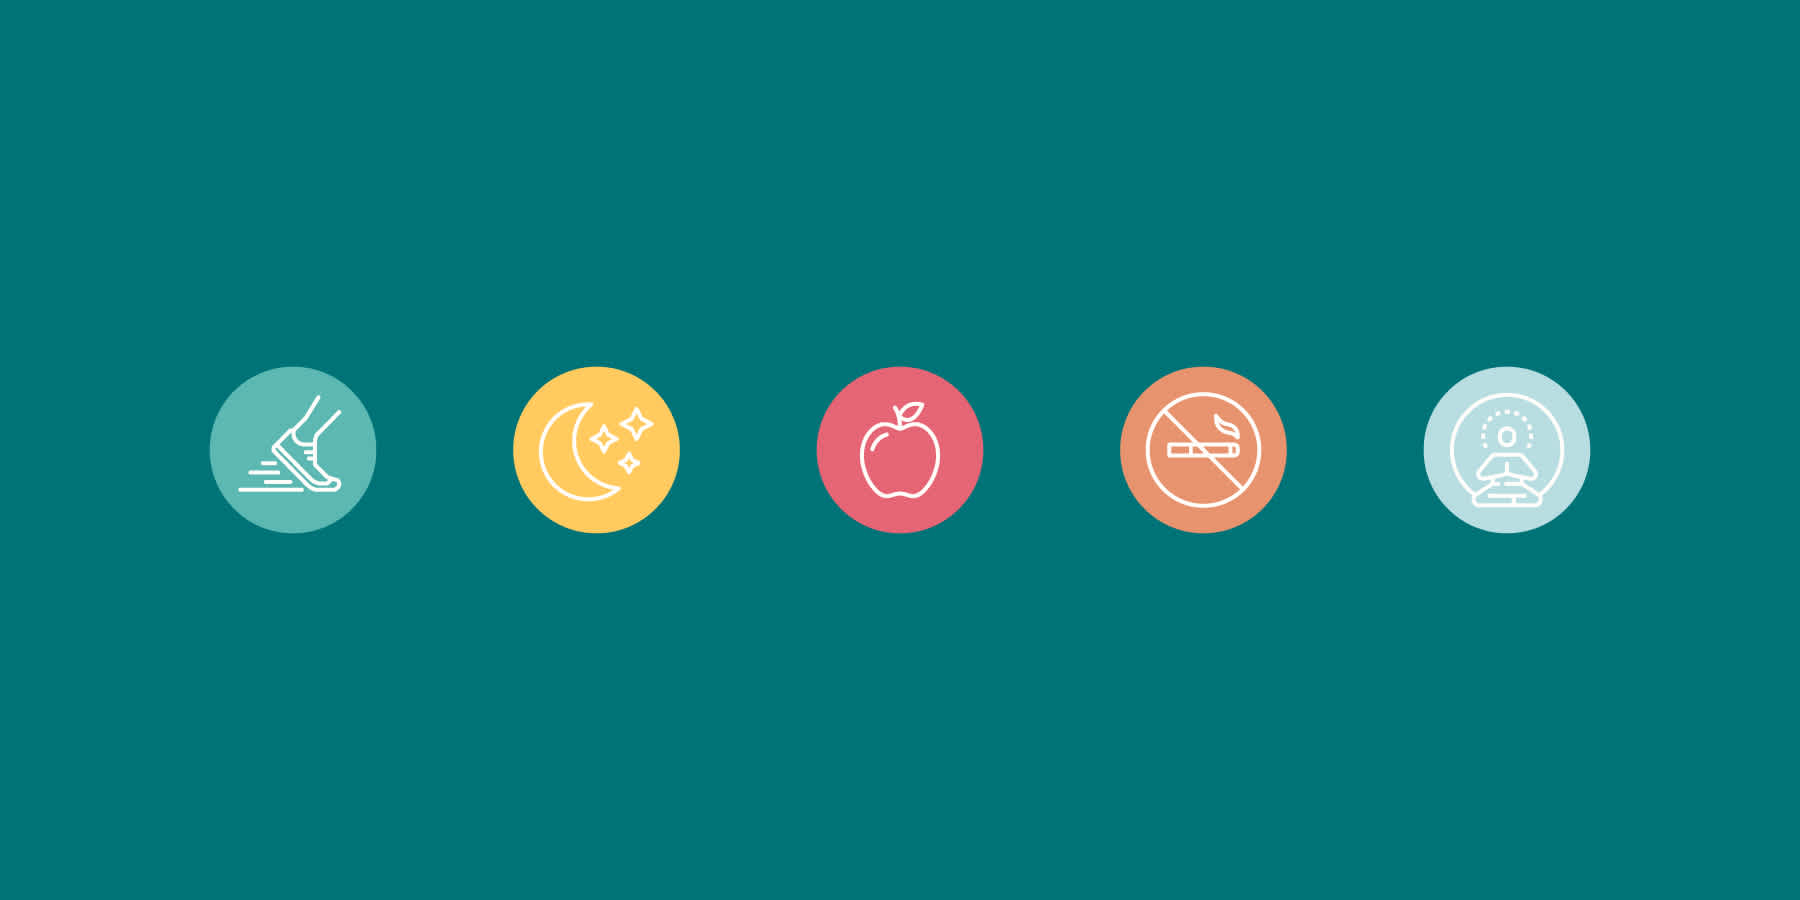 Multicolored icons against teal background illustrating different ways to support heart health